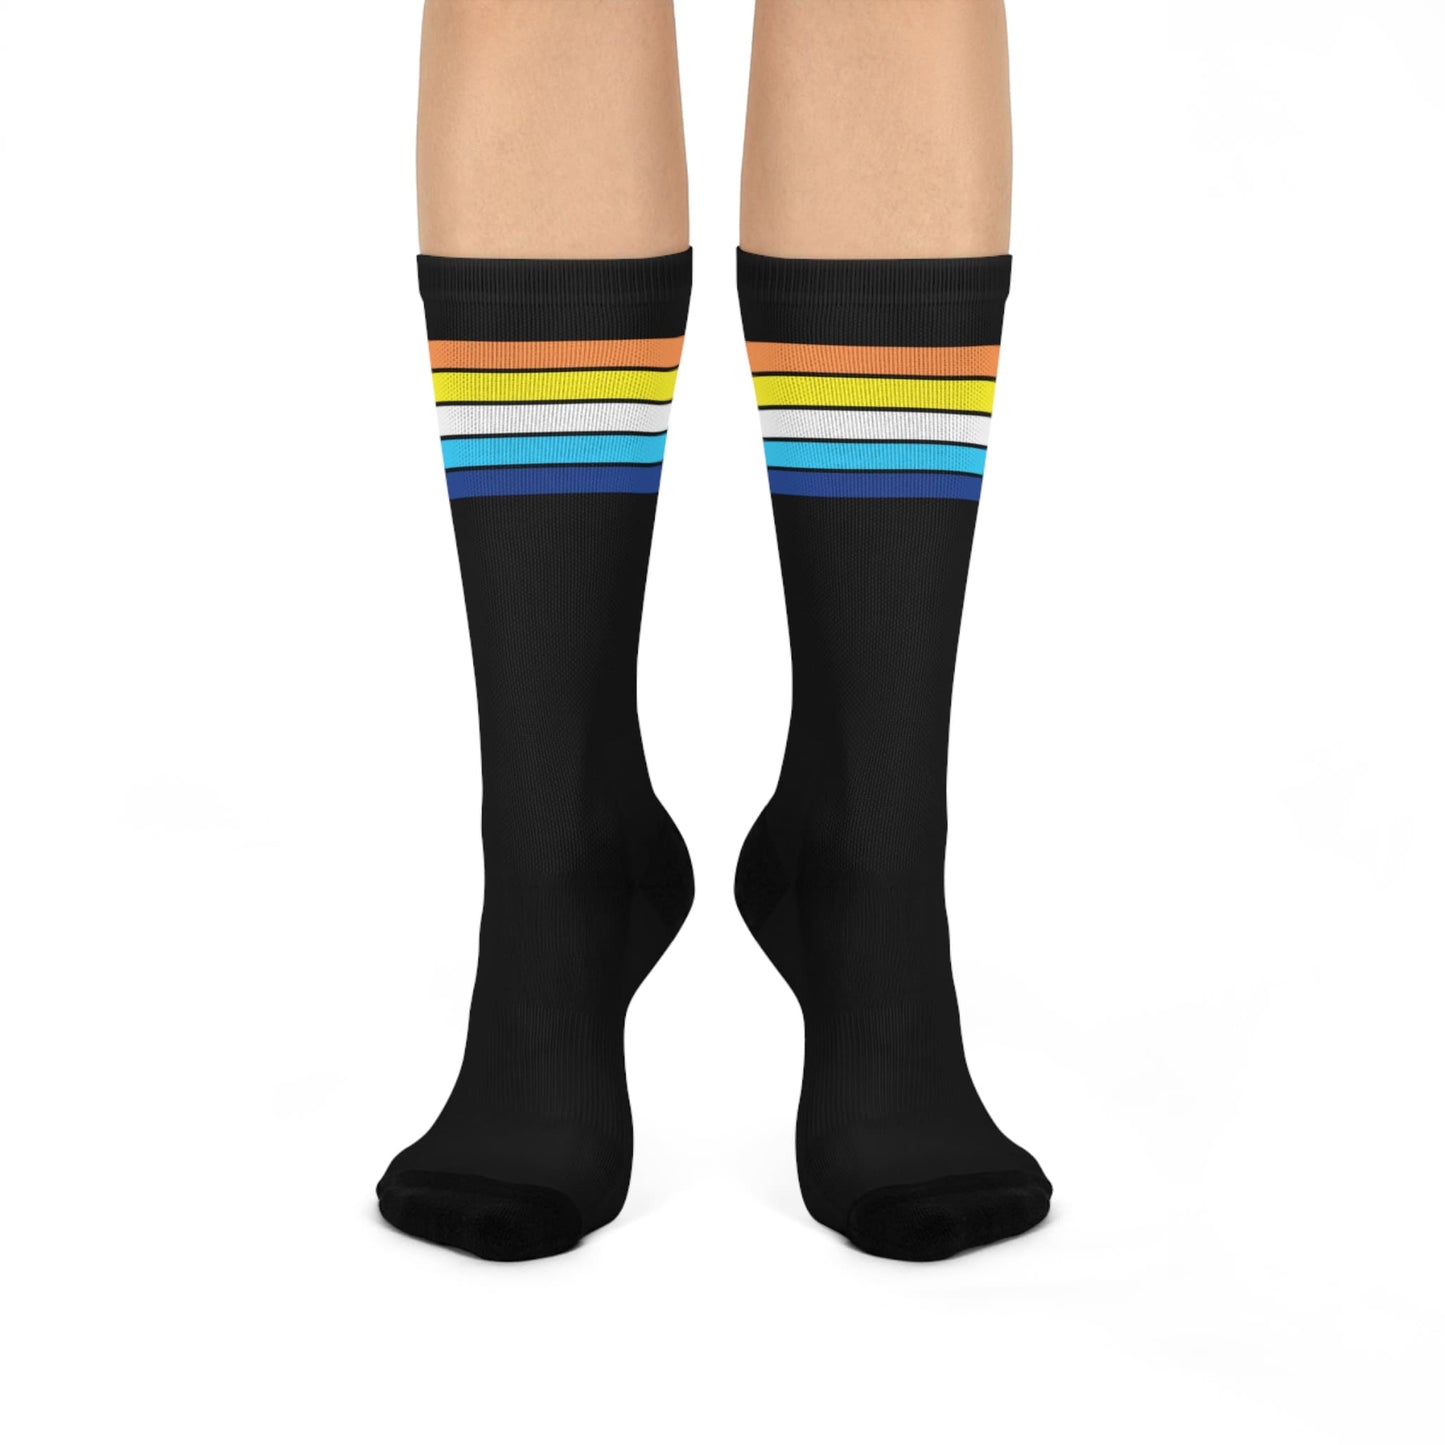 aroace socks, aromantic asexual pride flag, front